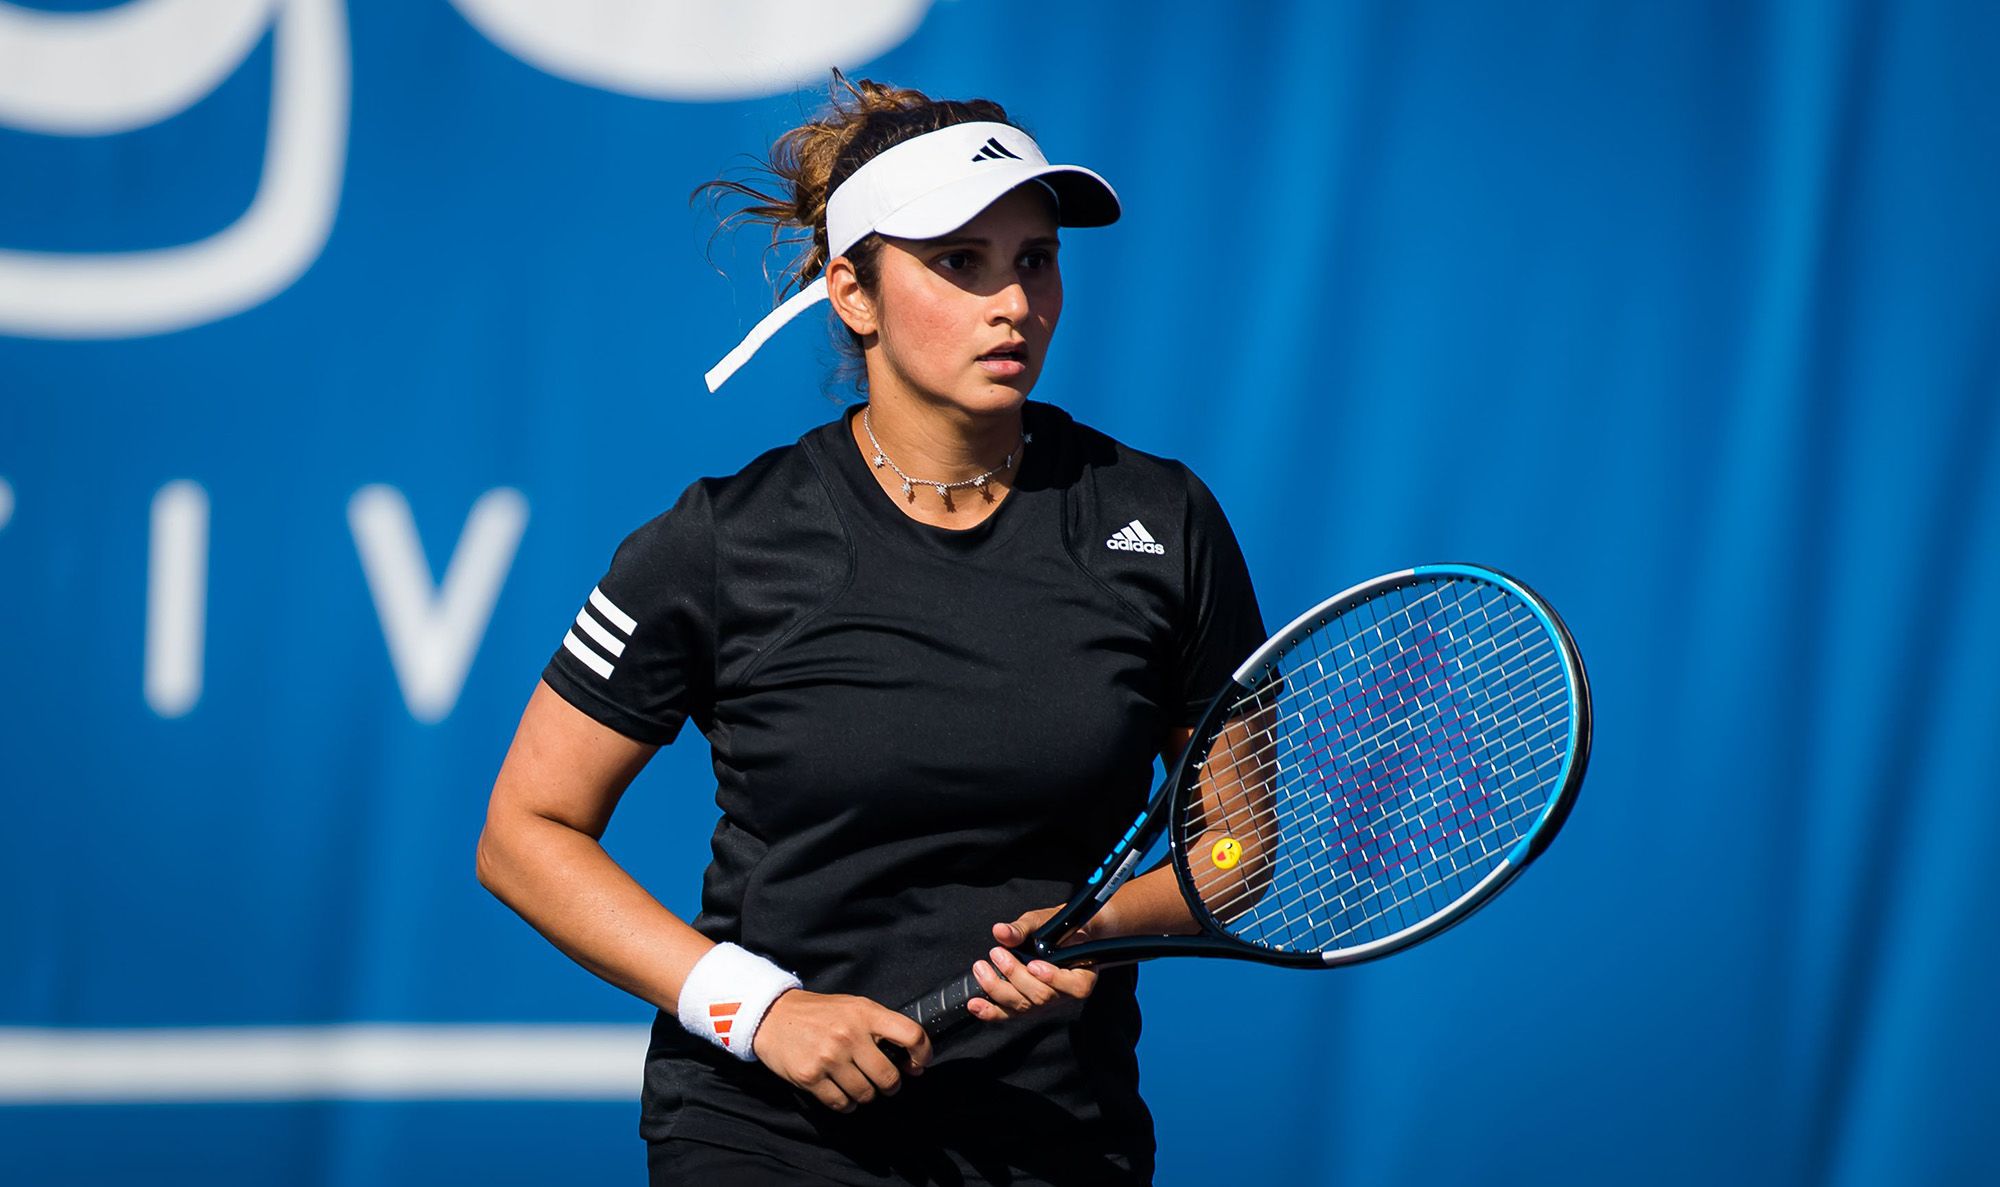 Sania Mirza Best Tenish Player Live Pictures , Sania Mirza in 2023